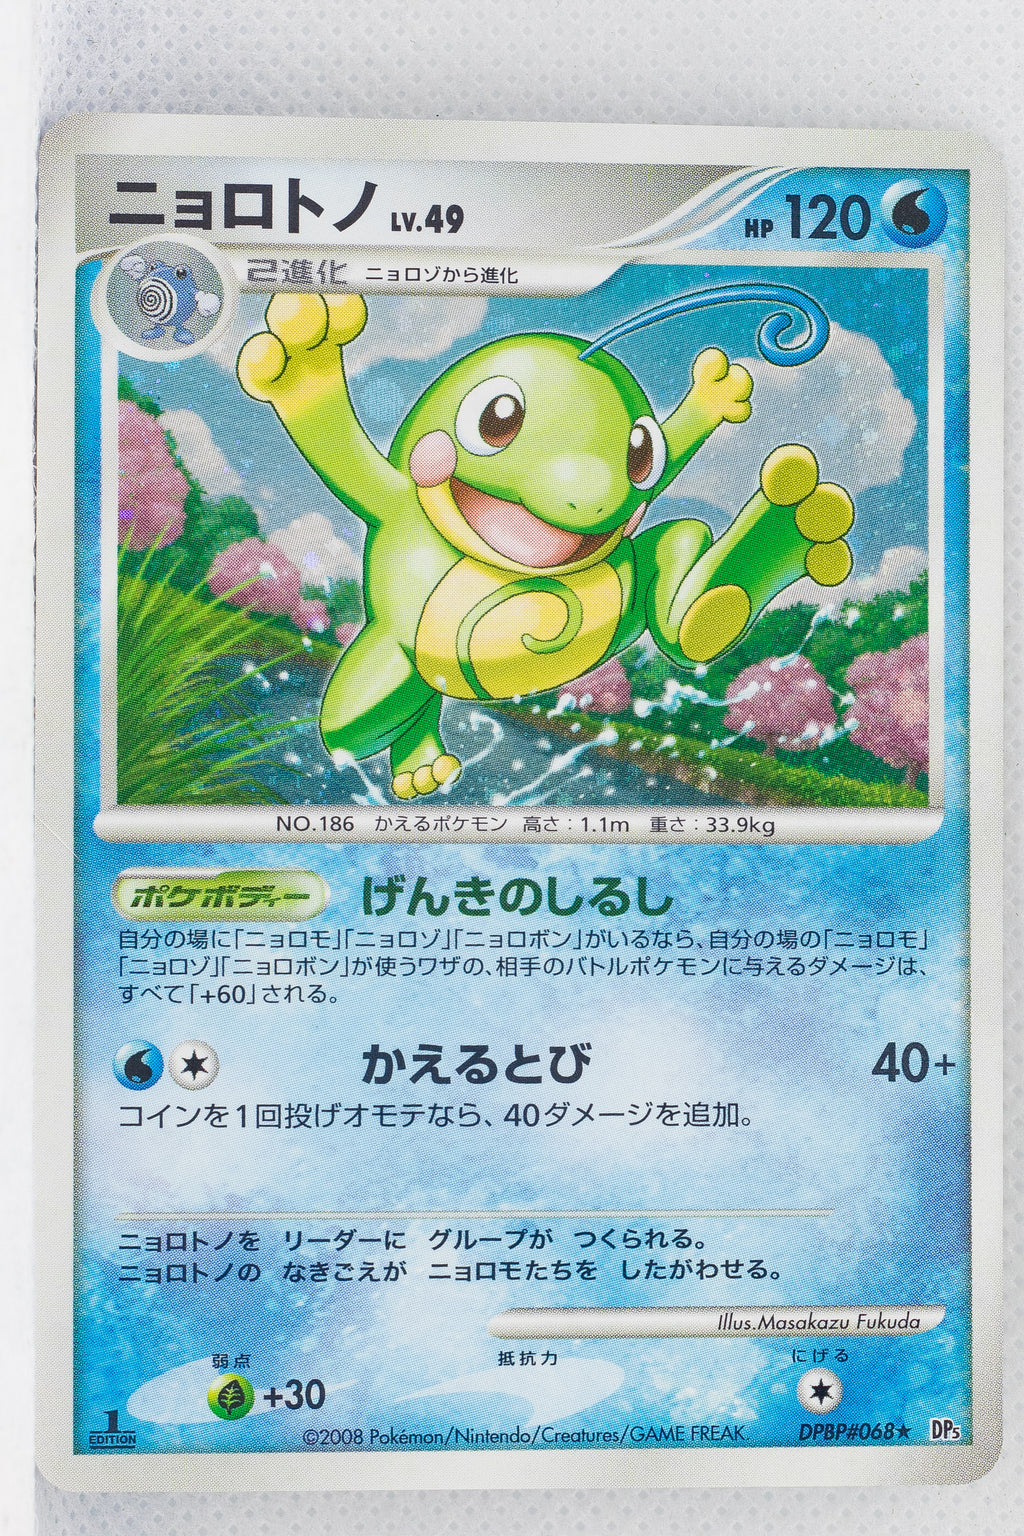 DP5 Cry from the Mysterious Politoed 1st Edition Holo